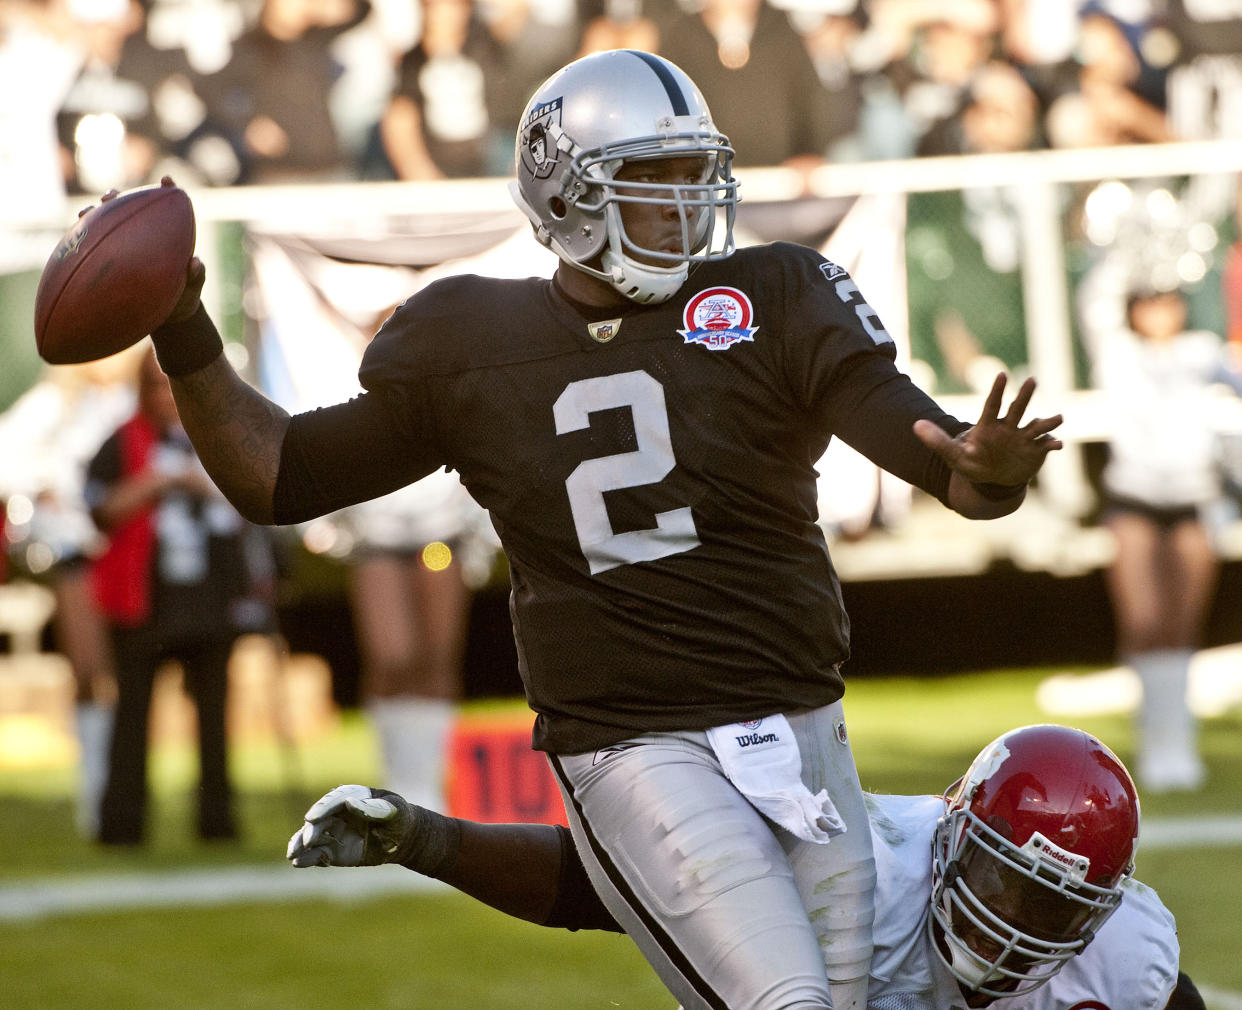 November 15, 2009: Oakland Raiders quarterback JaMarcus Russell #2 passes while Kansas City Chiefs defensive end Andy Studebaker #96 is about to sack him on Sunday, November 15, 2009 at Alameda County Coliseum in Oakland, California. The Chiefs defeated the Raiders 16-10. (Photo by Al Golub/Icon Sportswire/Corbis/Icon Sportswire via Getty Images)